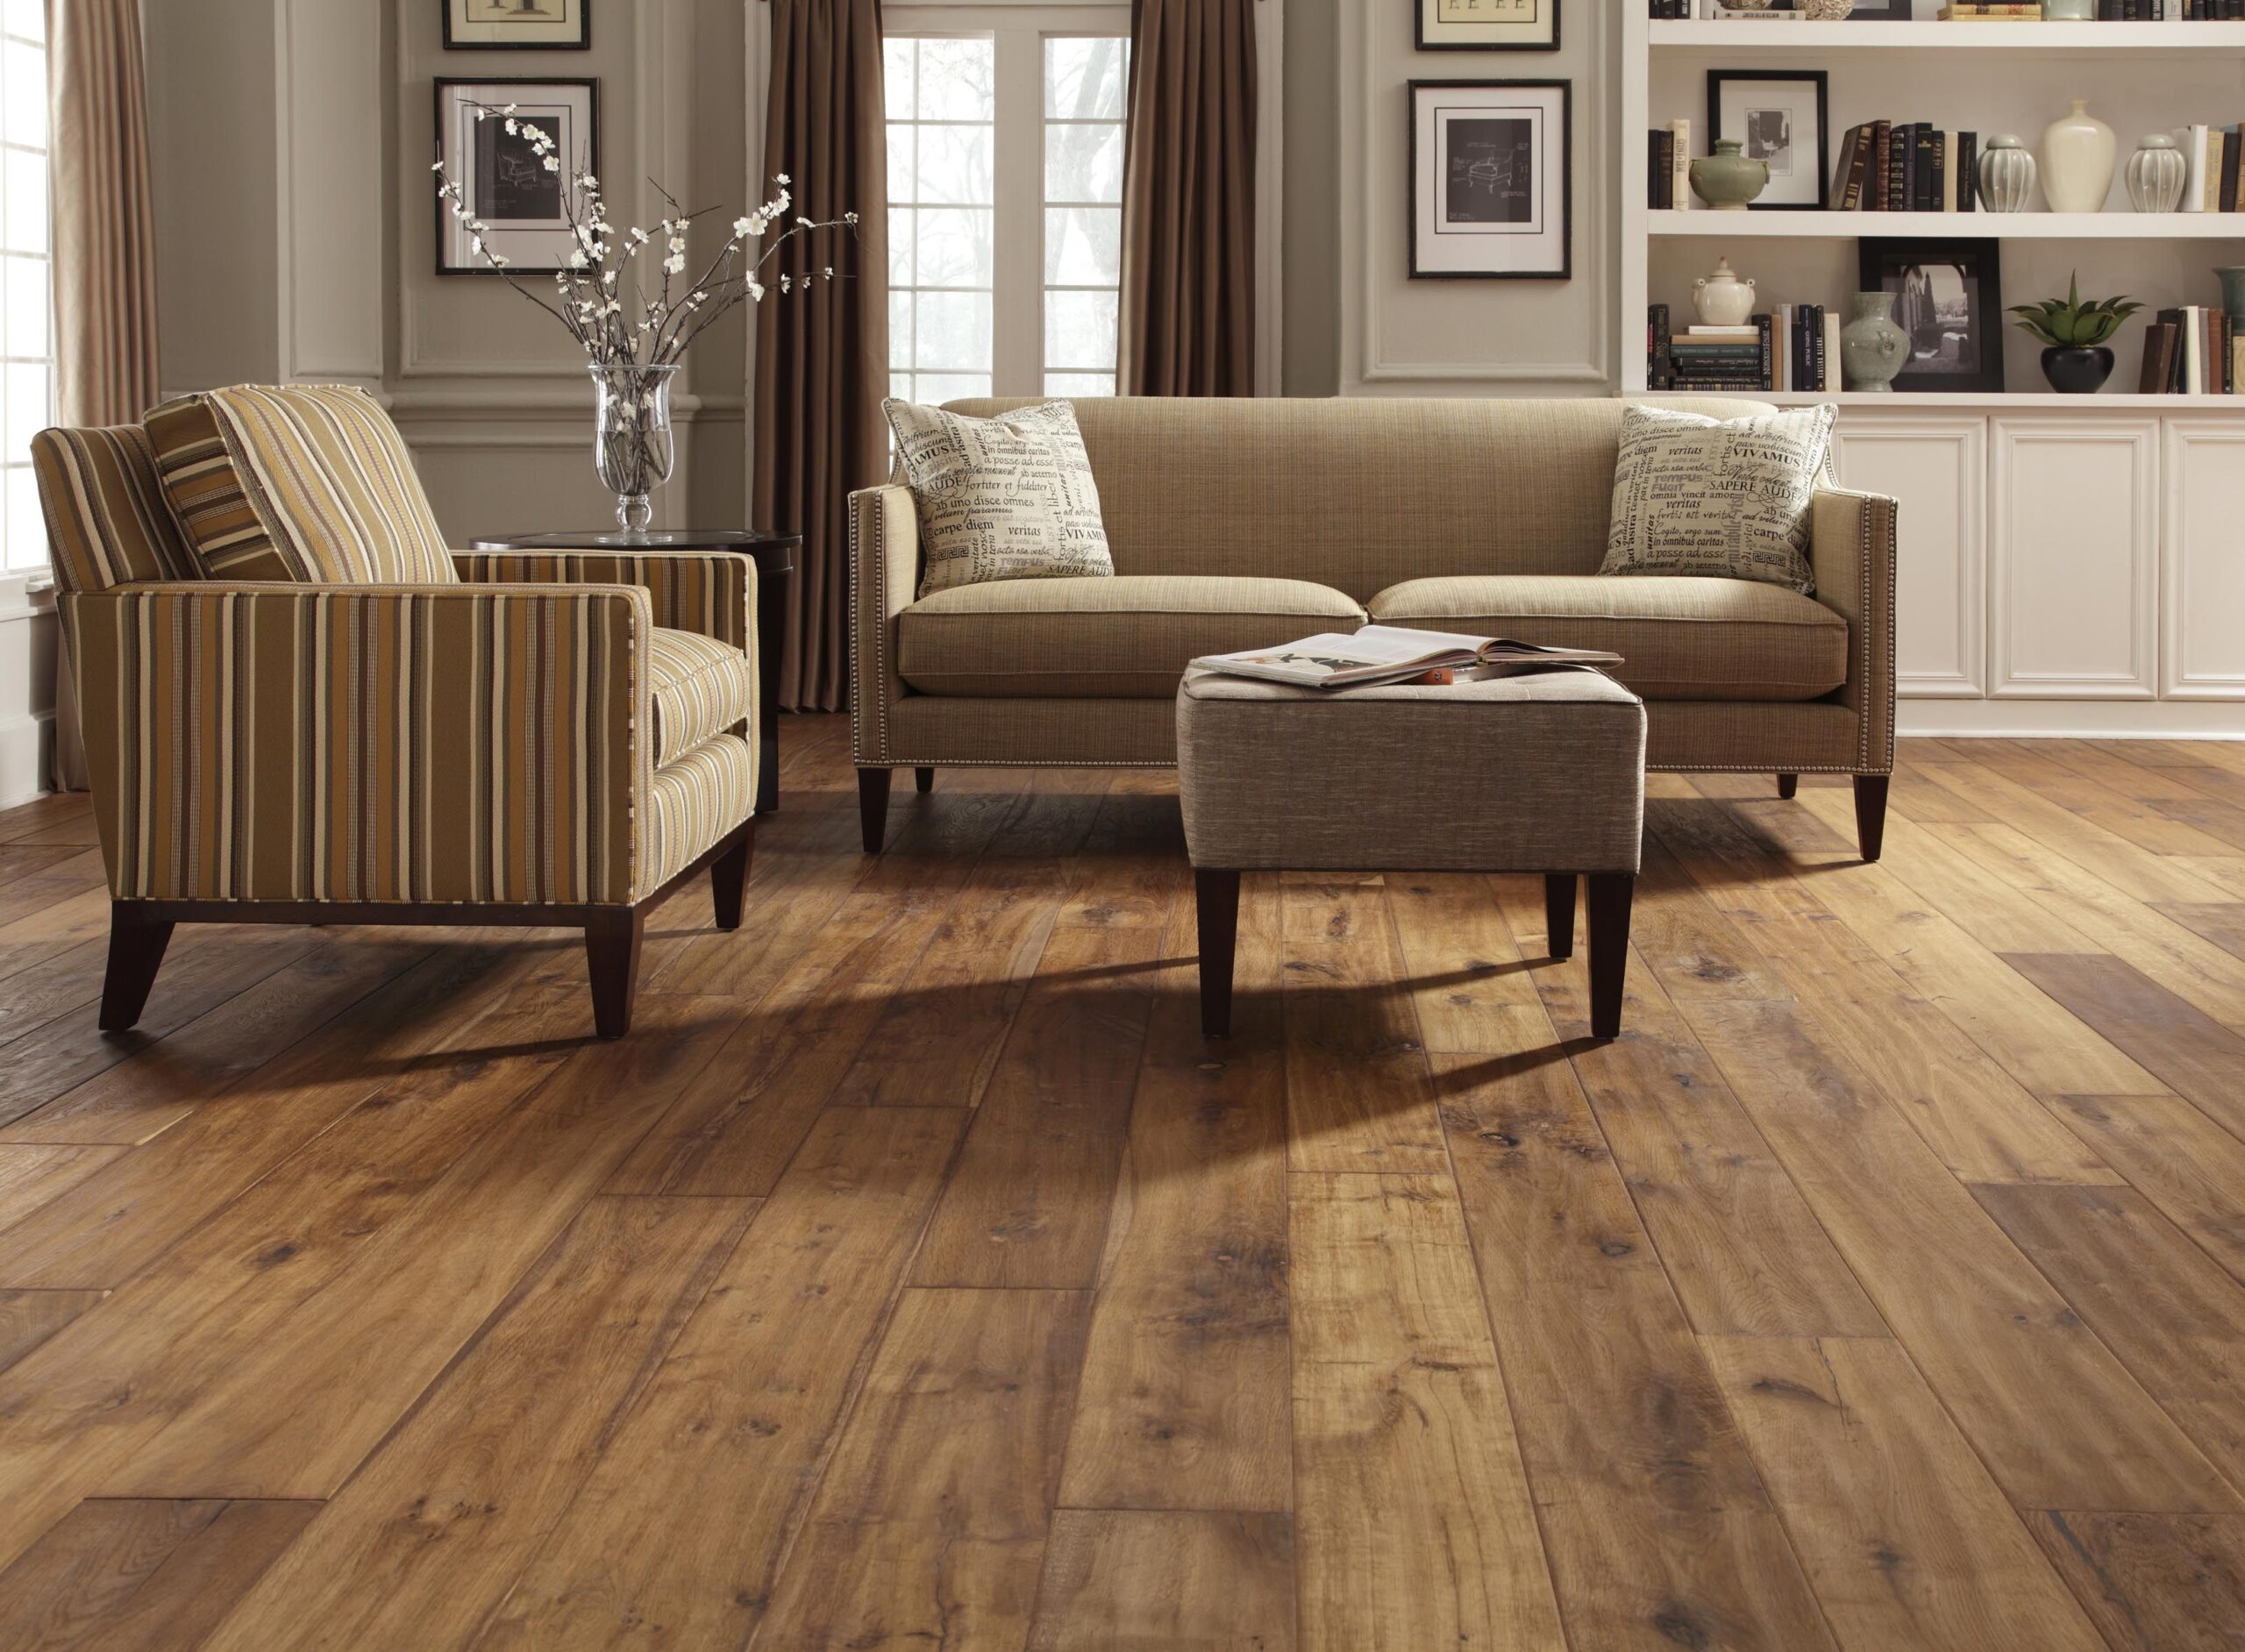 5 Best Laminate Flooring Colours For Your Home » Residence Style